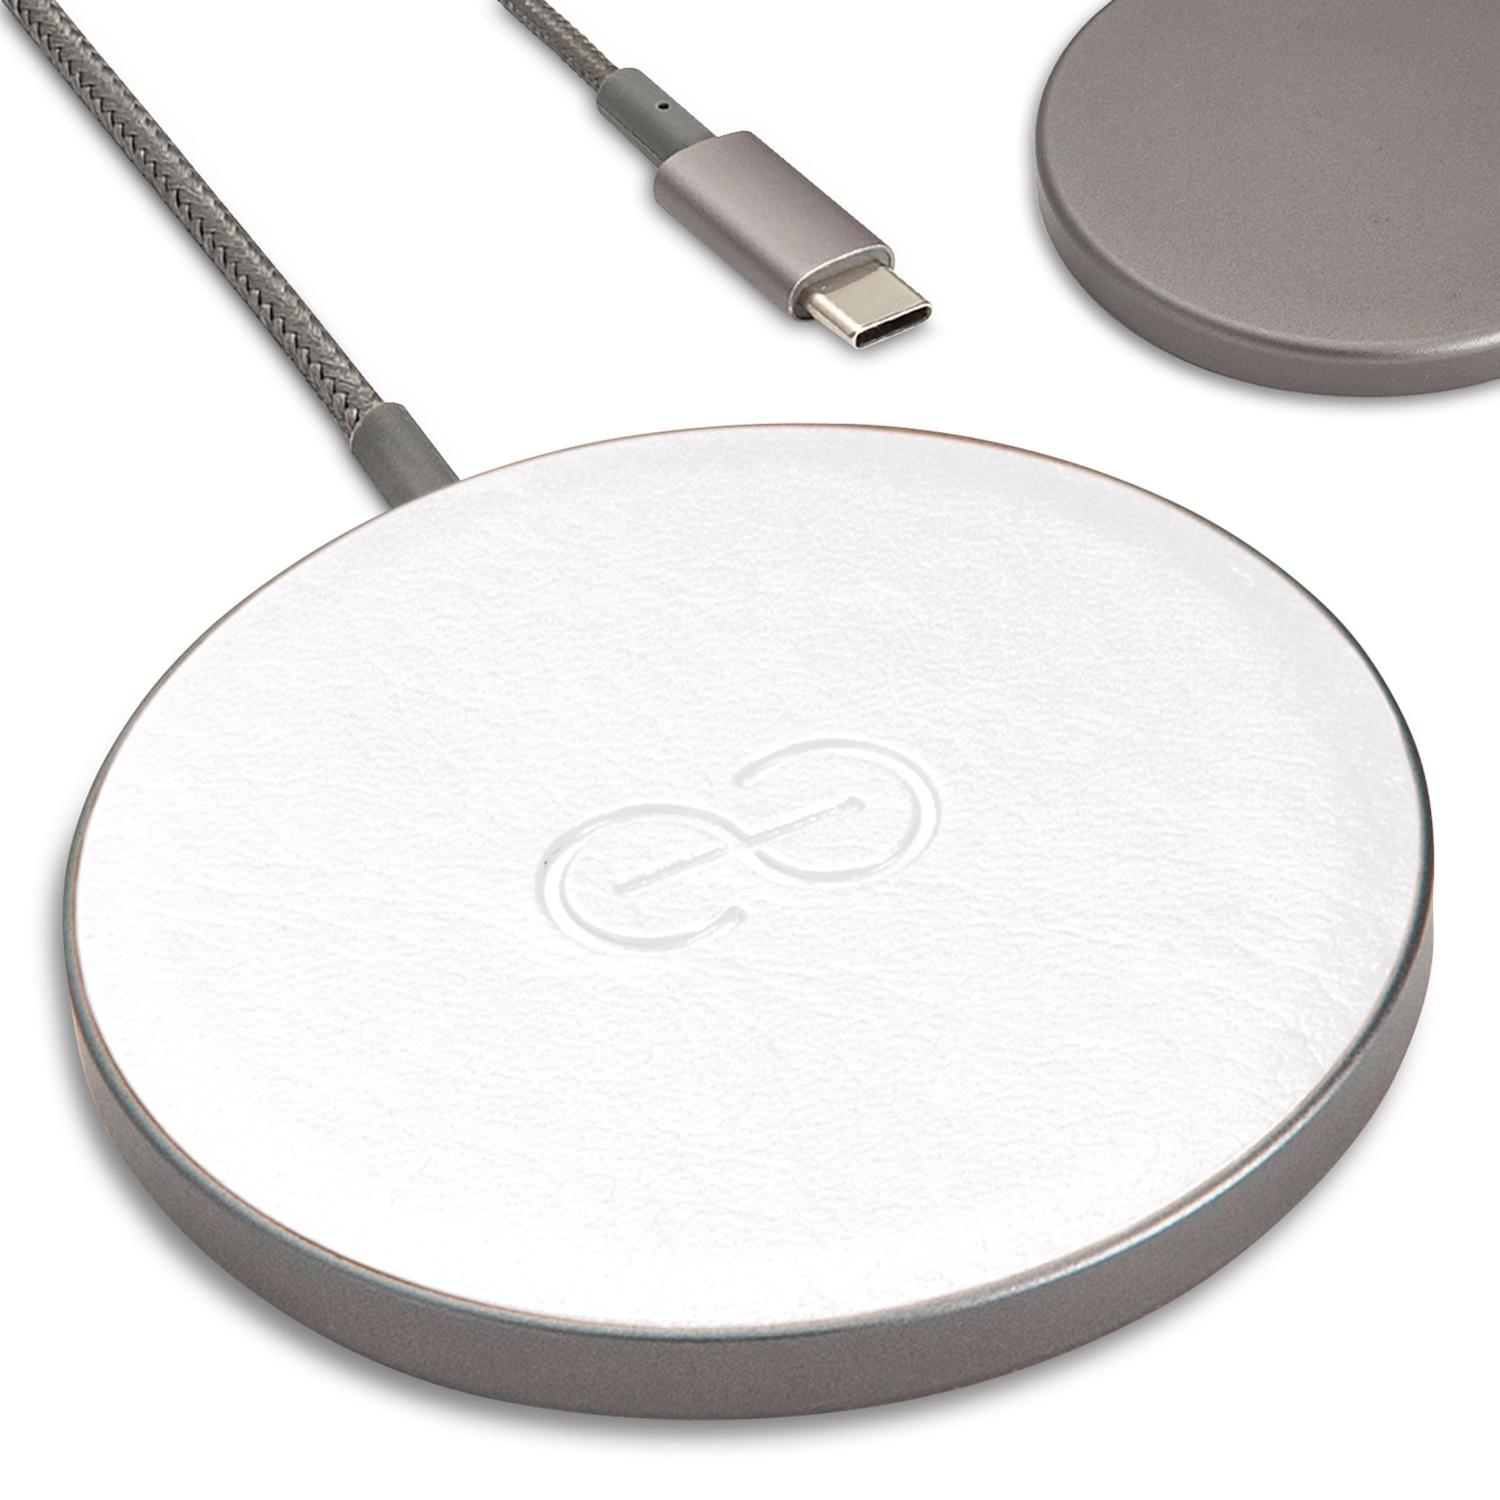  Dreem Empower Magnetic Wireless Charger Pad